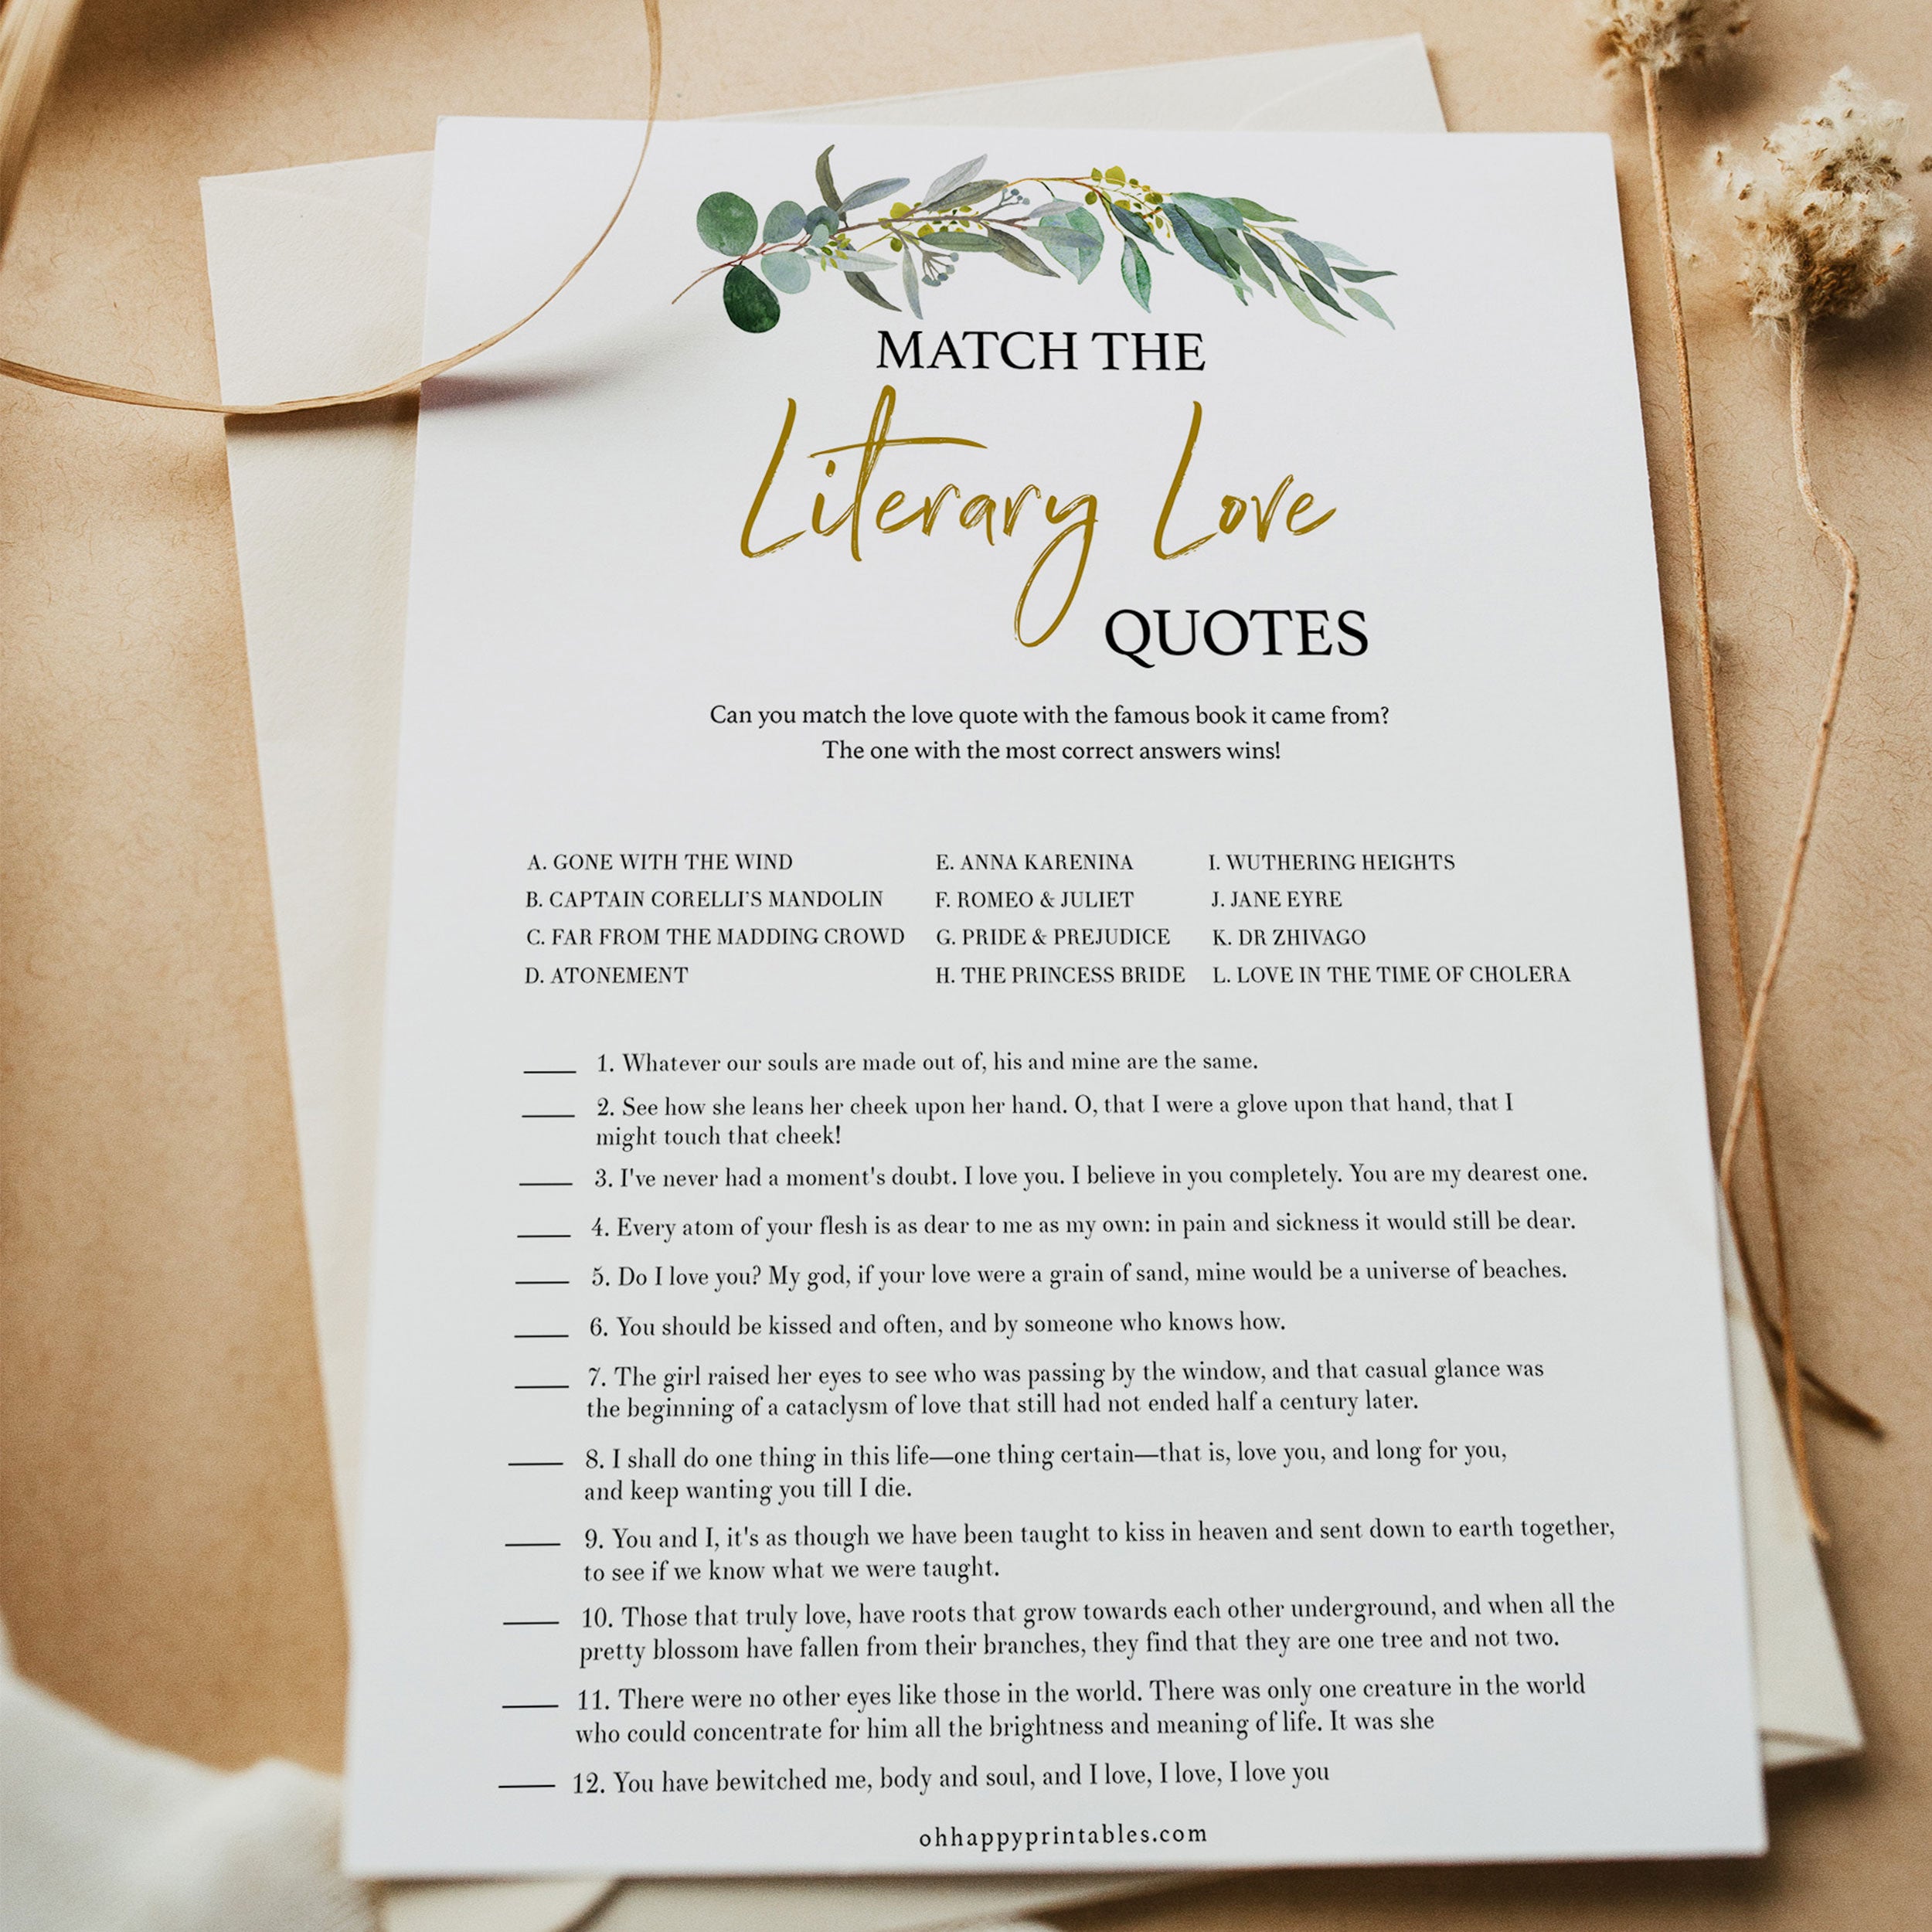 match the literary love quotes, Bridal shower games, printable bridal shower games, eucalyptus greenery bridal games